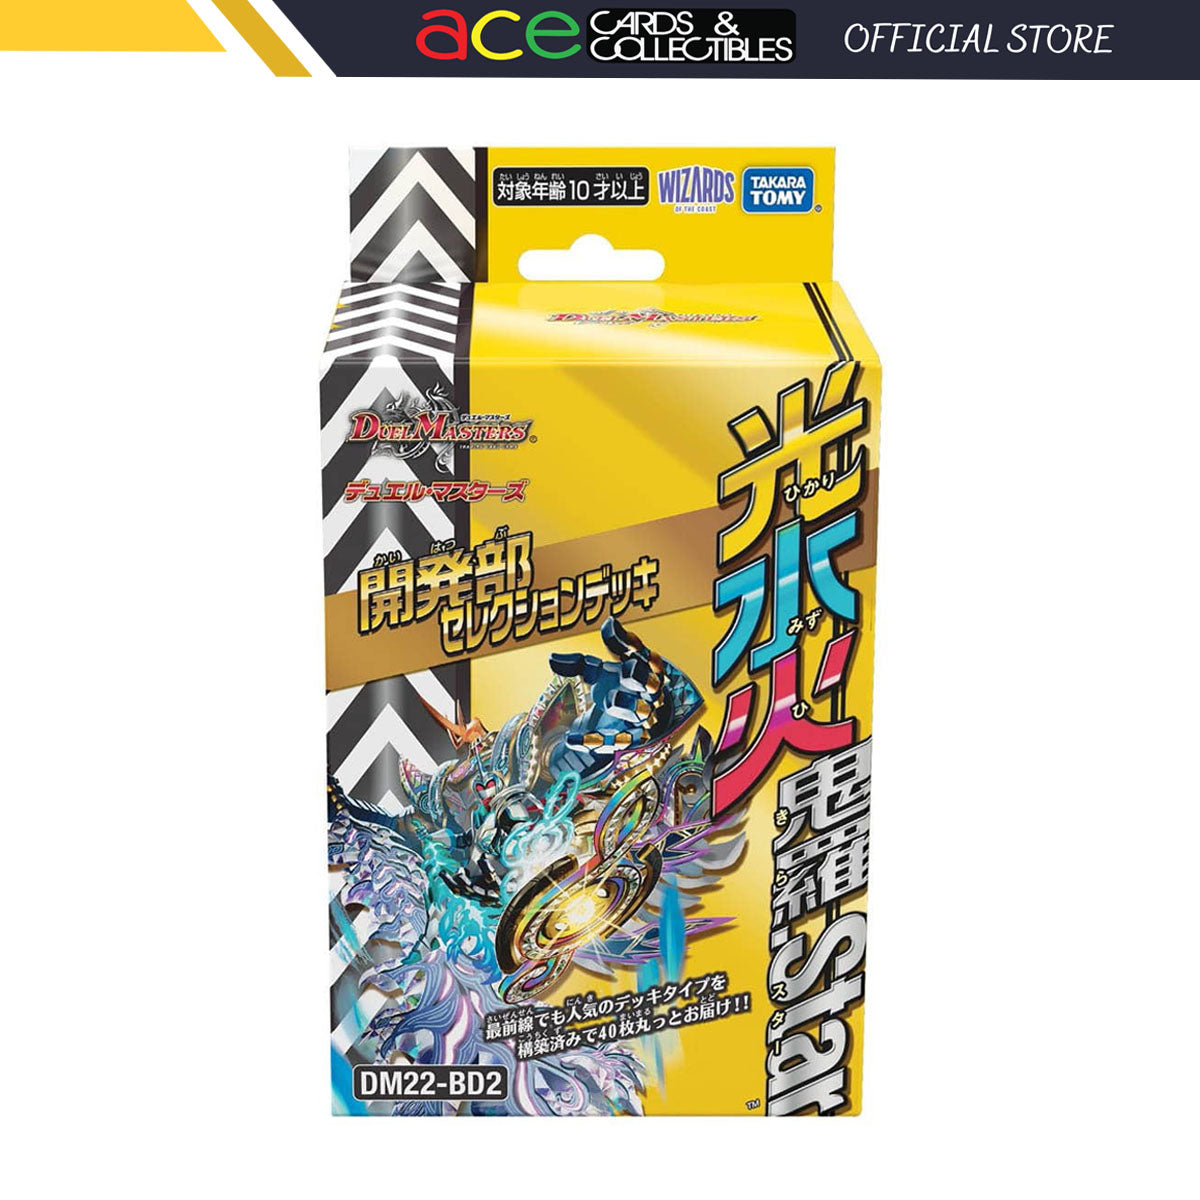 Duel Masters TCG Development Department Selection Deck Vol.1 [DM22-BD2] (Japanese)-Takara Tomy-Ace Cards & Collectibles